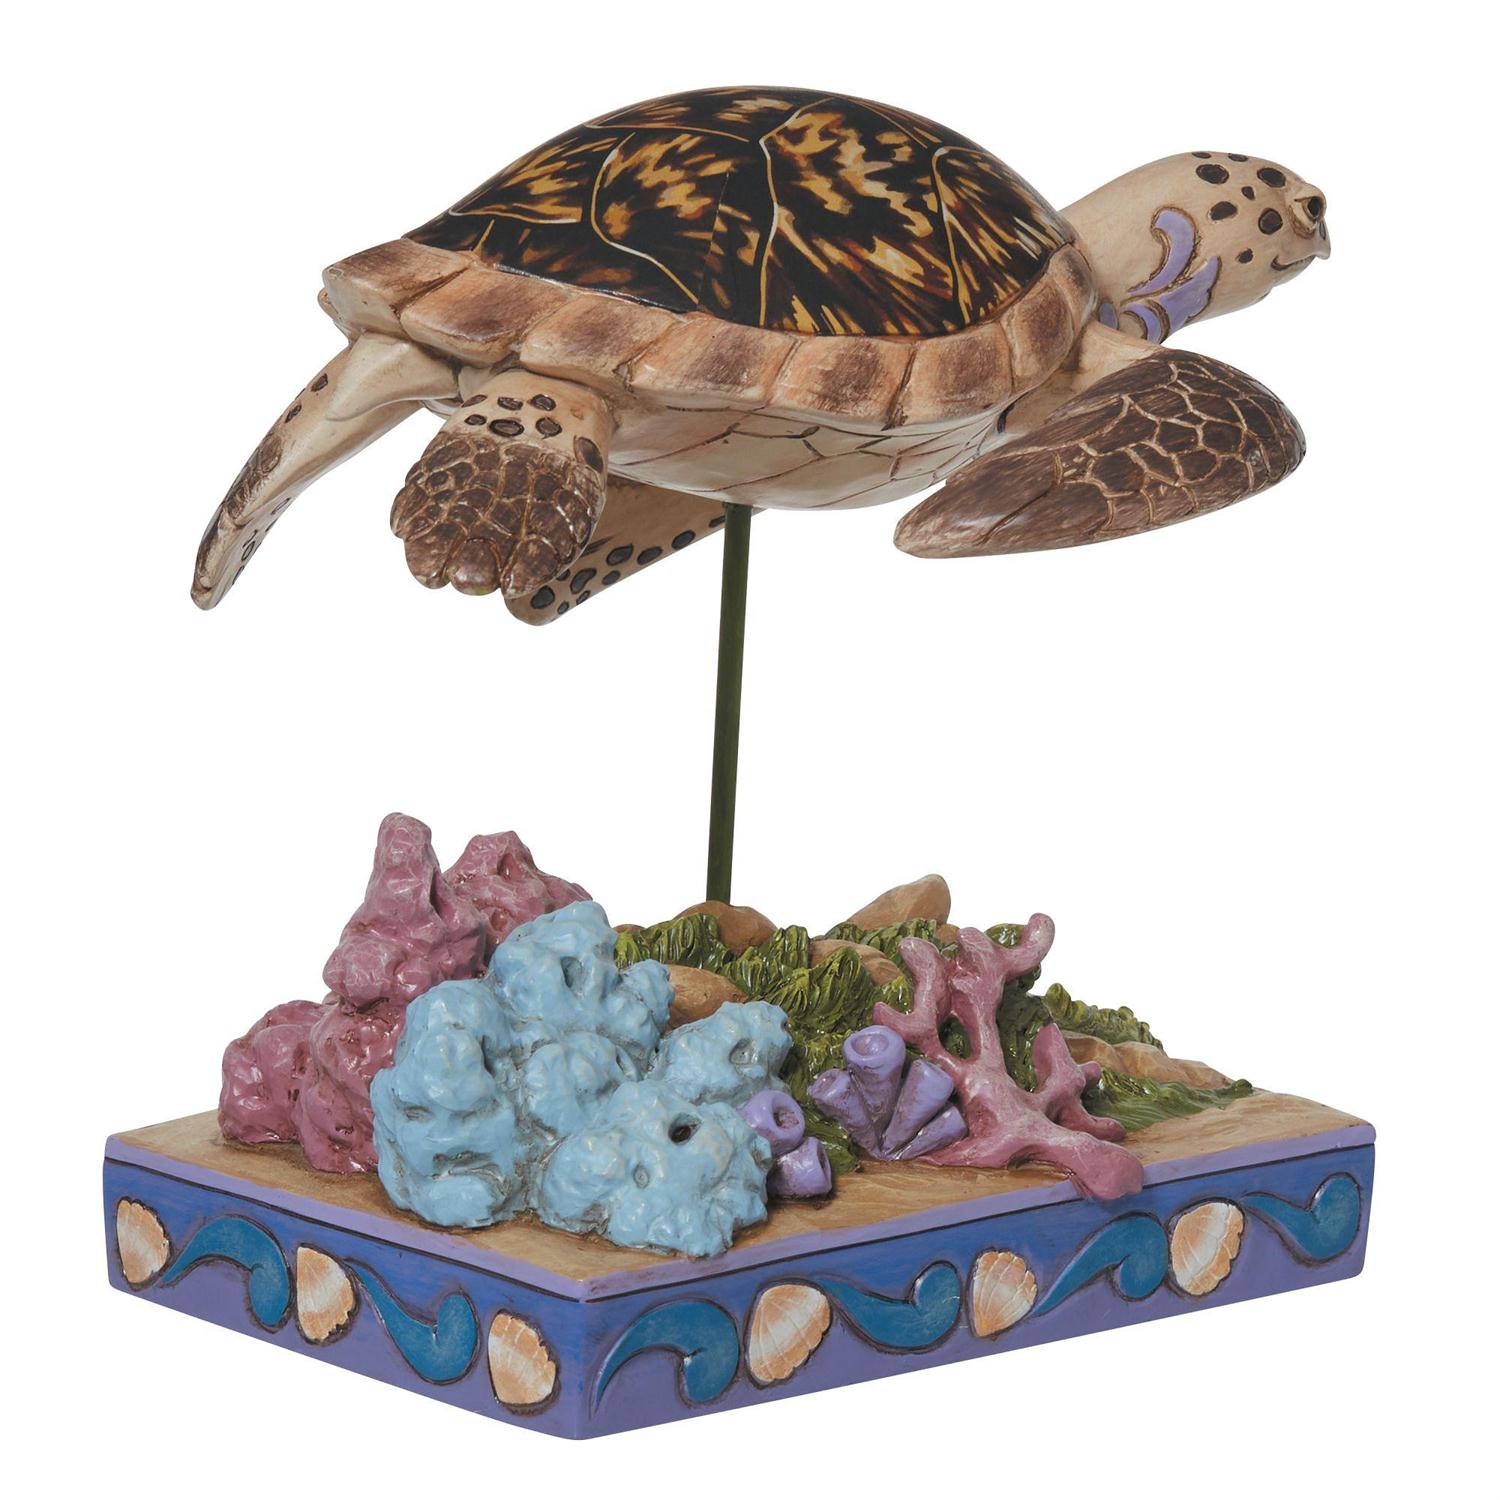 Enesco Gifts Jim Shore Animal Planet Hawksbill Sea Turtle Figurine Free Shipping Iveys Giftts And Decor